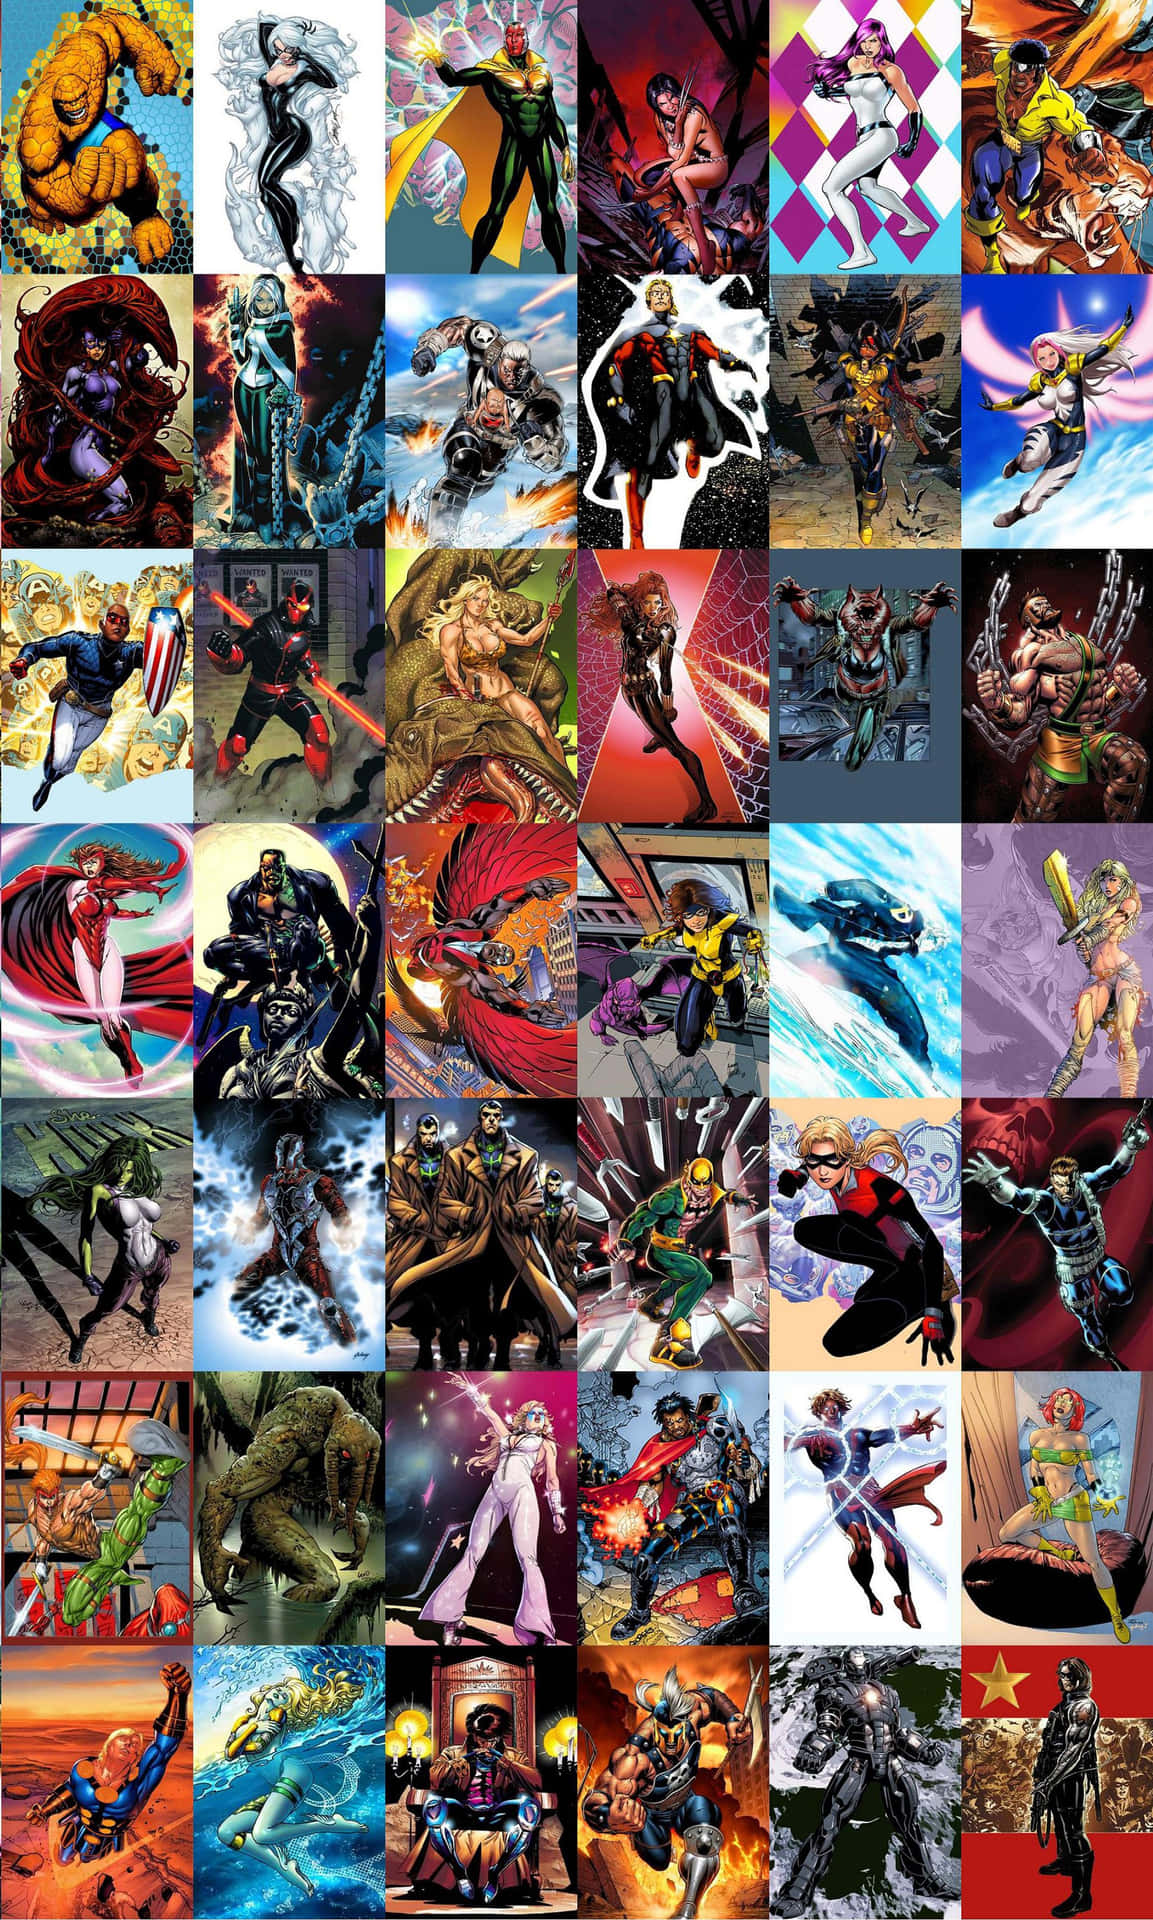 Marvelcollage Android - Collage Marvel Per Android Sfondo